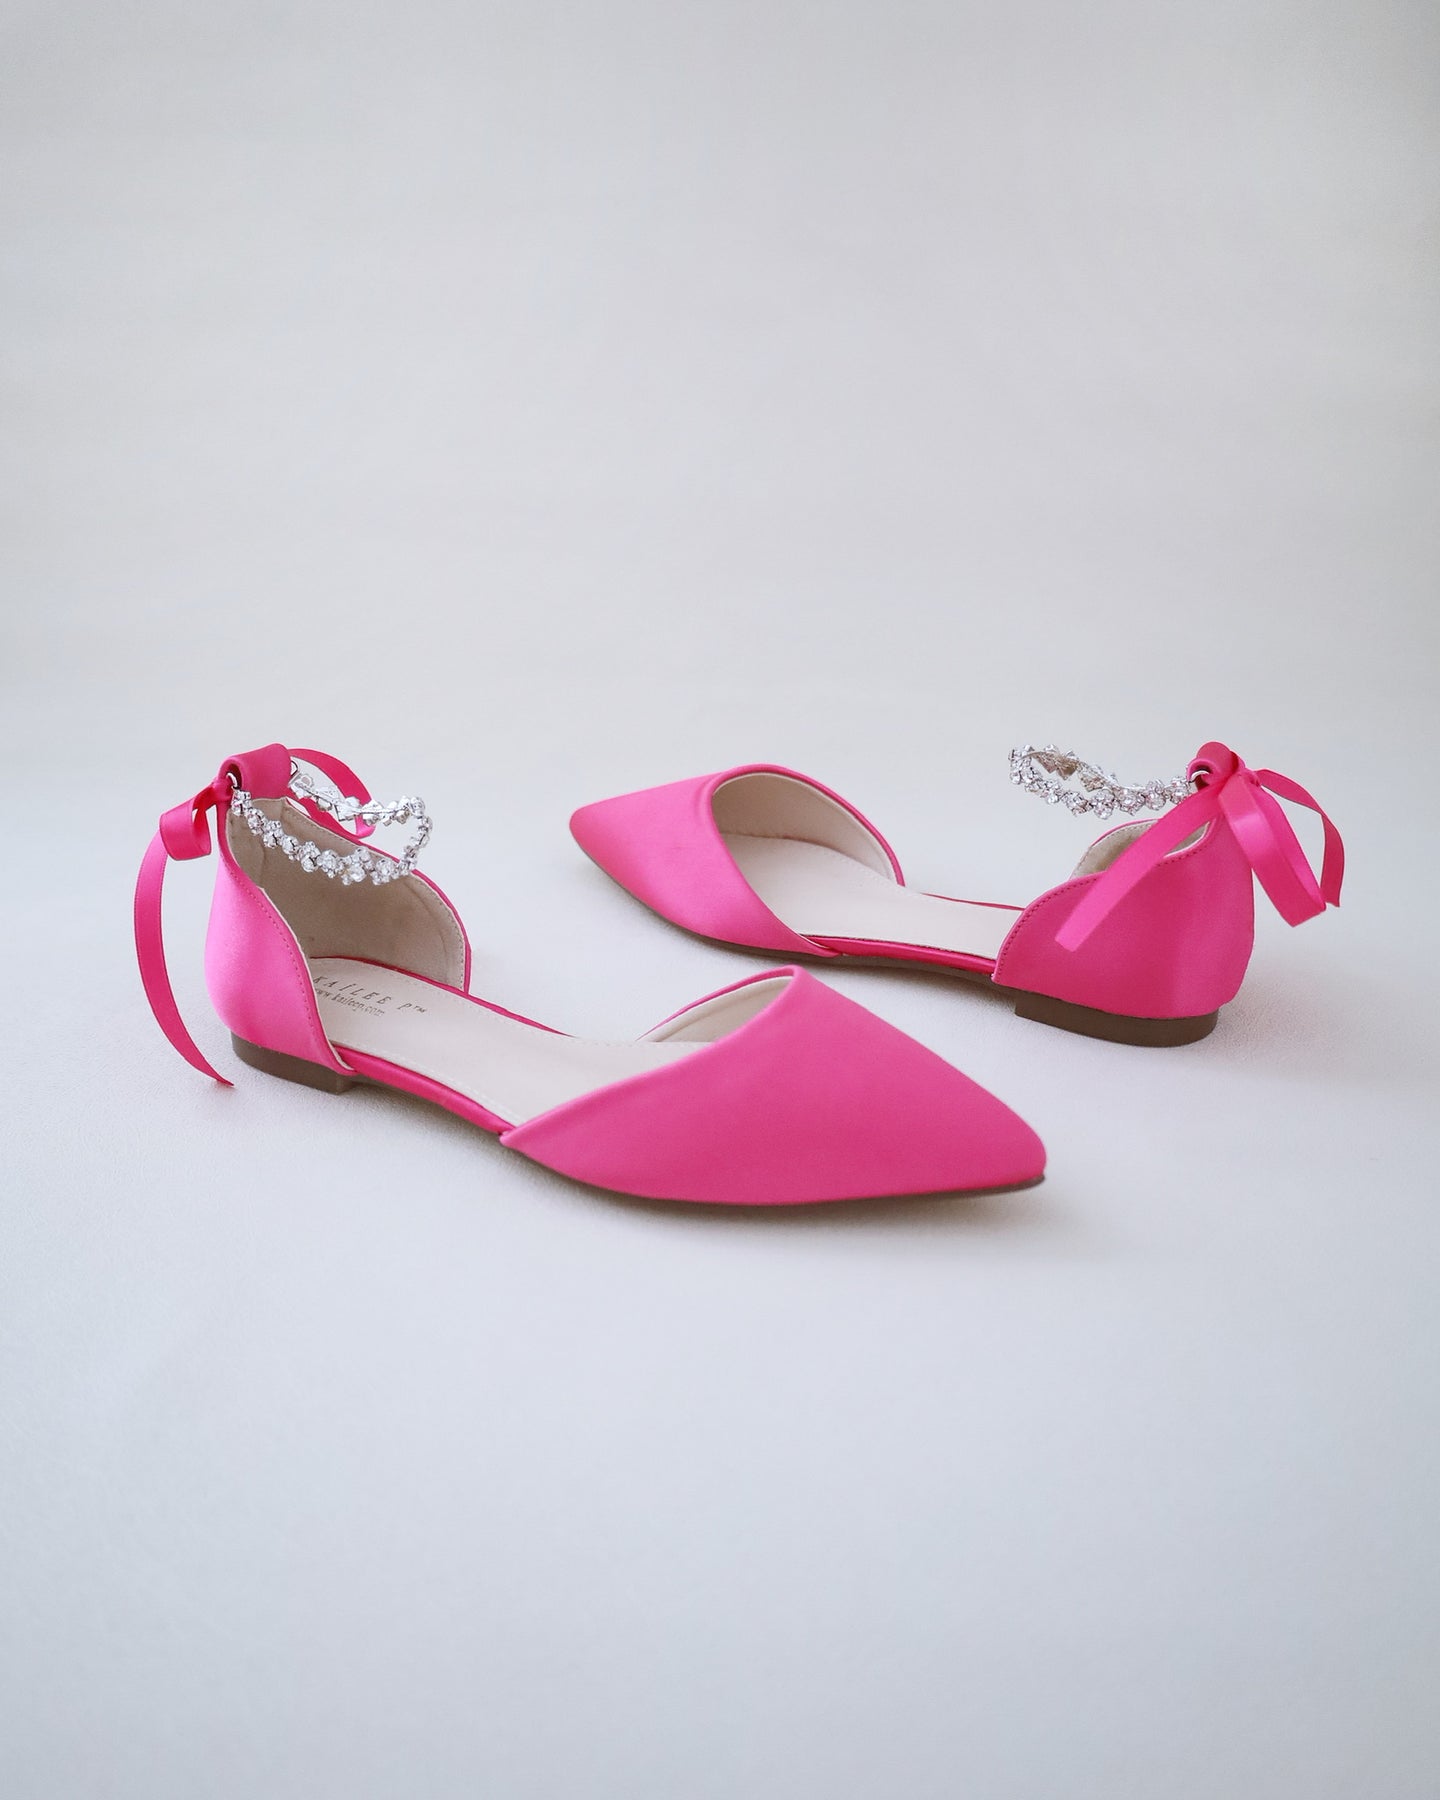 Satin Pointy Toe Evening Flats with Amaryllis Strap, Prom Party Shoes ...